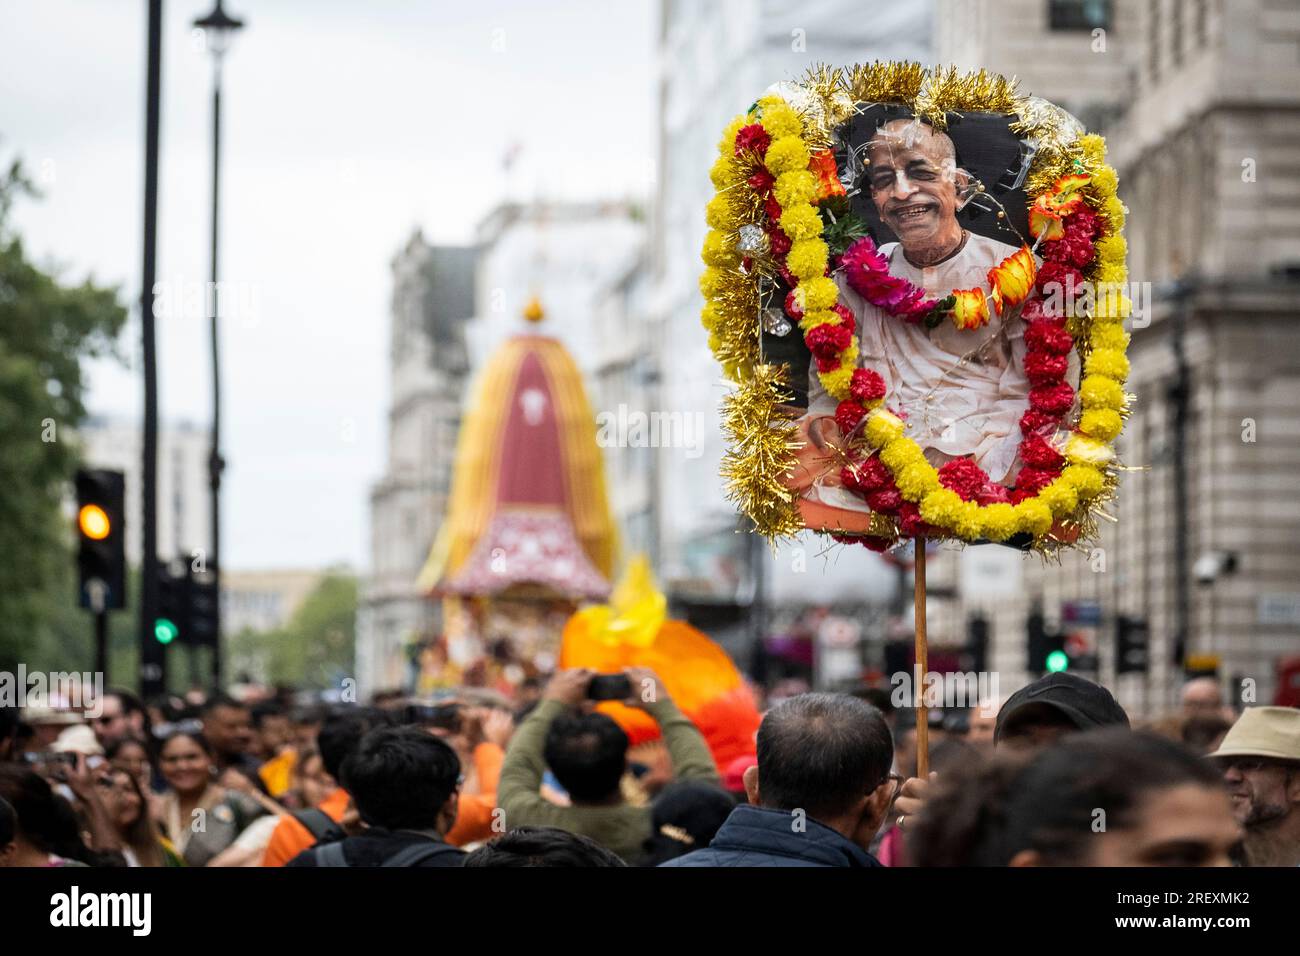 London, UK.  30 July 2023.  Hare Krishna devotees with a sign showing their founder Bhaktivedanta Swani Prabhupada during the Rathayatra Festival, or Festival of the Chariots, pass through Piccadilly.  Usually three decorated chariots, carrying the deity forms of Jagannatha, Baladeva and Subhadra, are wheeled from Hyde Park to Trafalgar Square, but this year due to space restrictions in the square, only one chariot is permitted.  Once in the square, devotees enjoy free vegetarian food and refreshments during the festival.   Credit: Stephen Chung / Alamy Live News Stock Photo